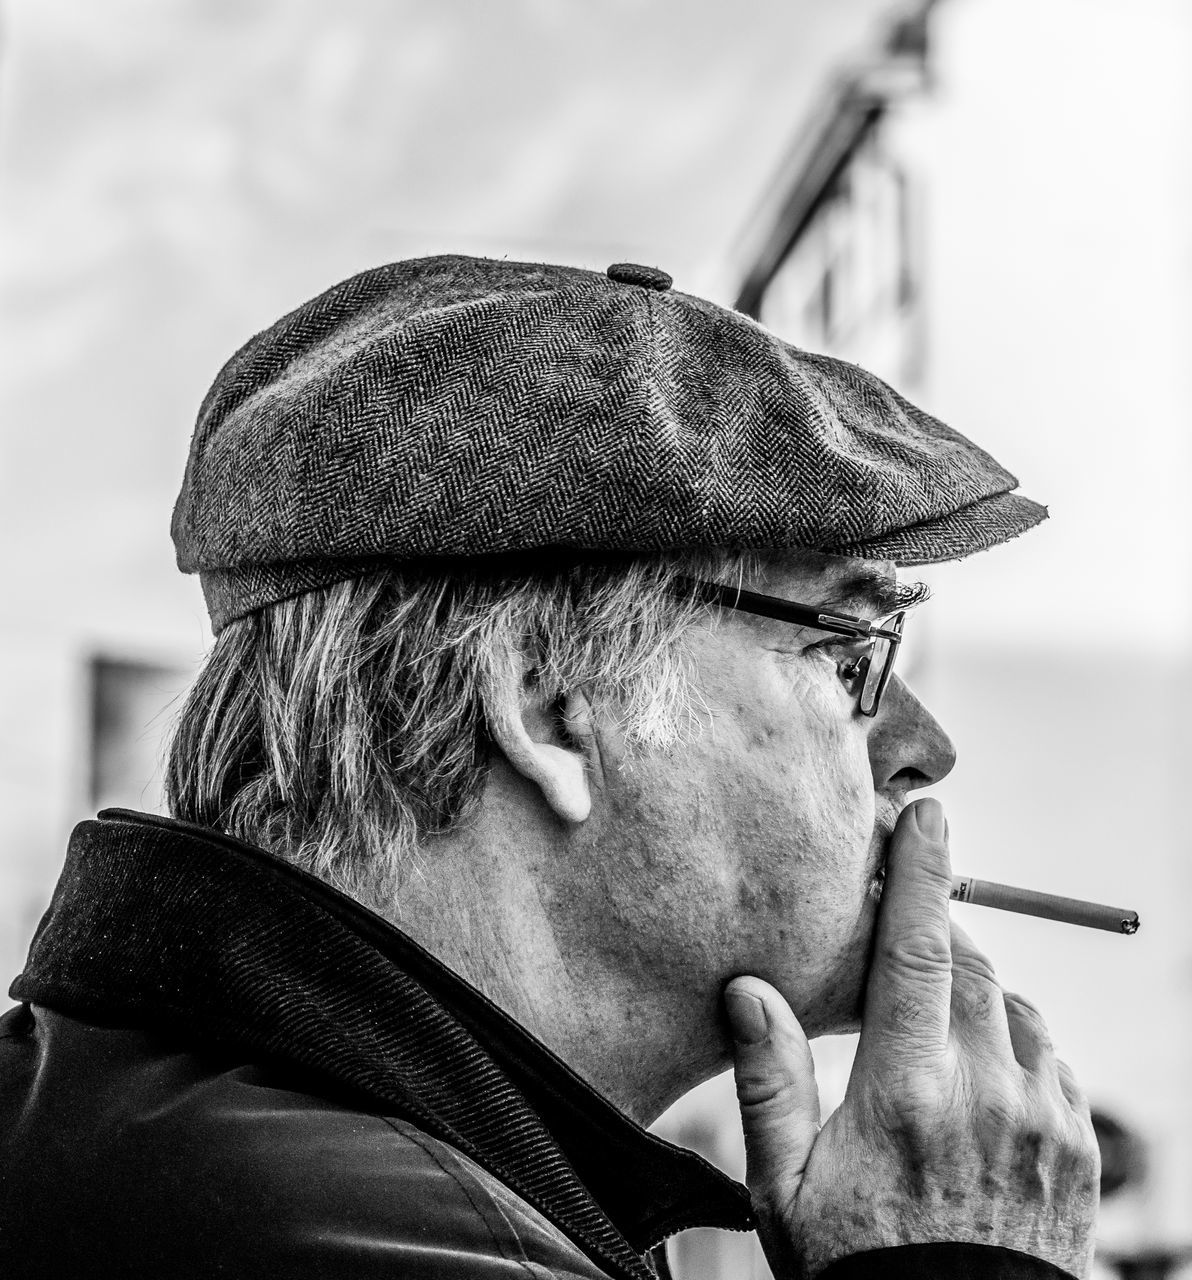 real people, one person, headshot, males, portrait, men, senior men, lifestyles, smoking issues, focus on foreground, senior adult, adult, facial hair, social issues, beard, clothing, bad habit, close-up, mature men, contemplation